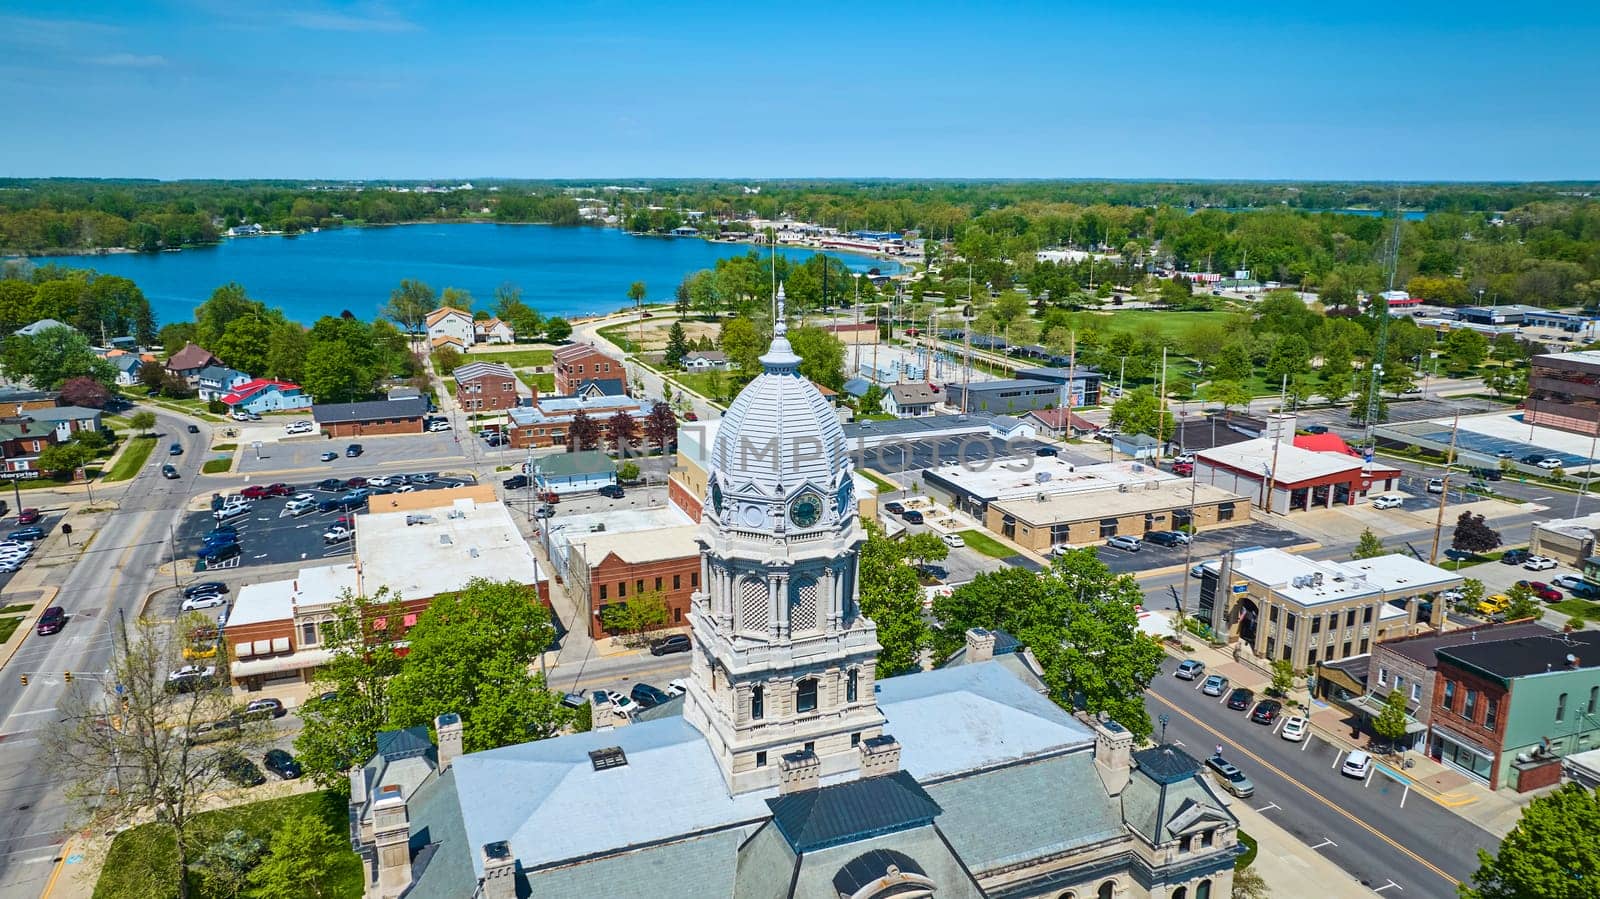 Aerial view of Warsaw, Indiana, showcasing the historic courthouse and vibrant community life by the lake.